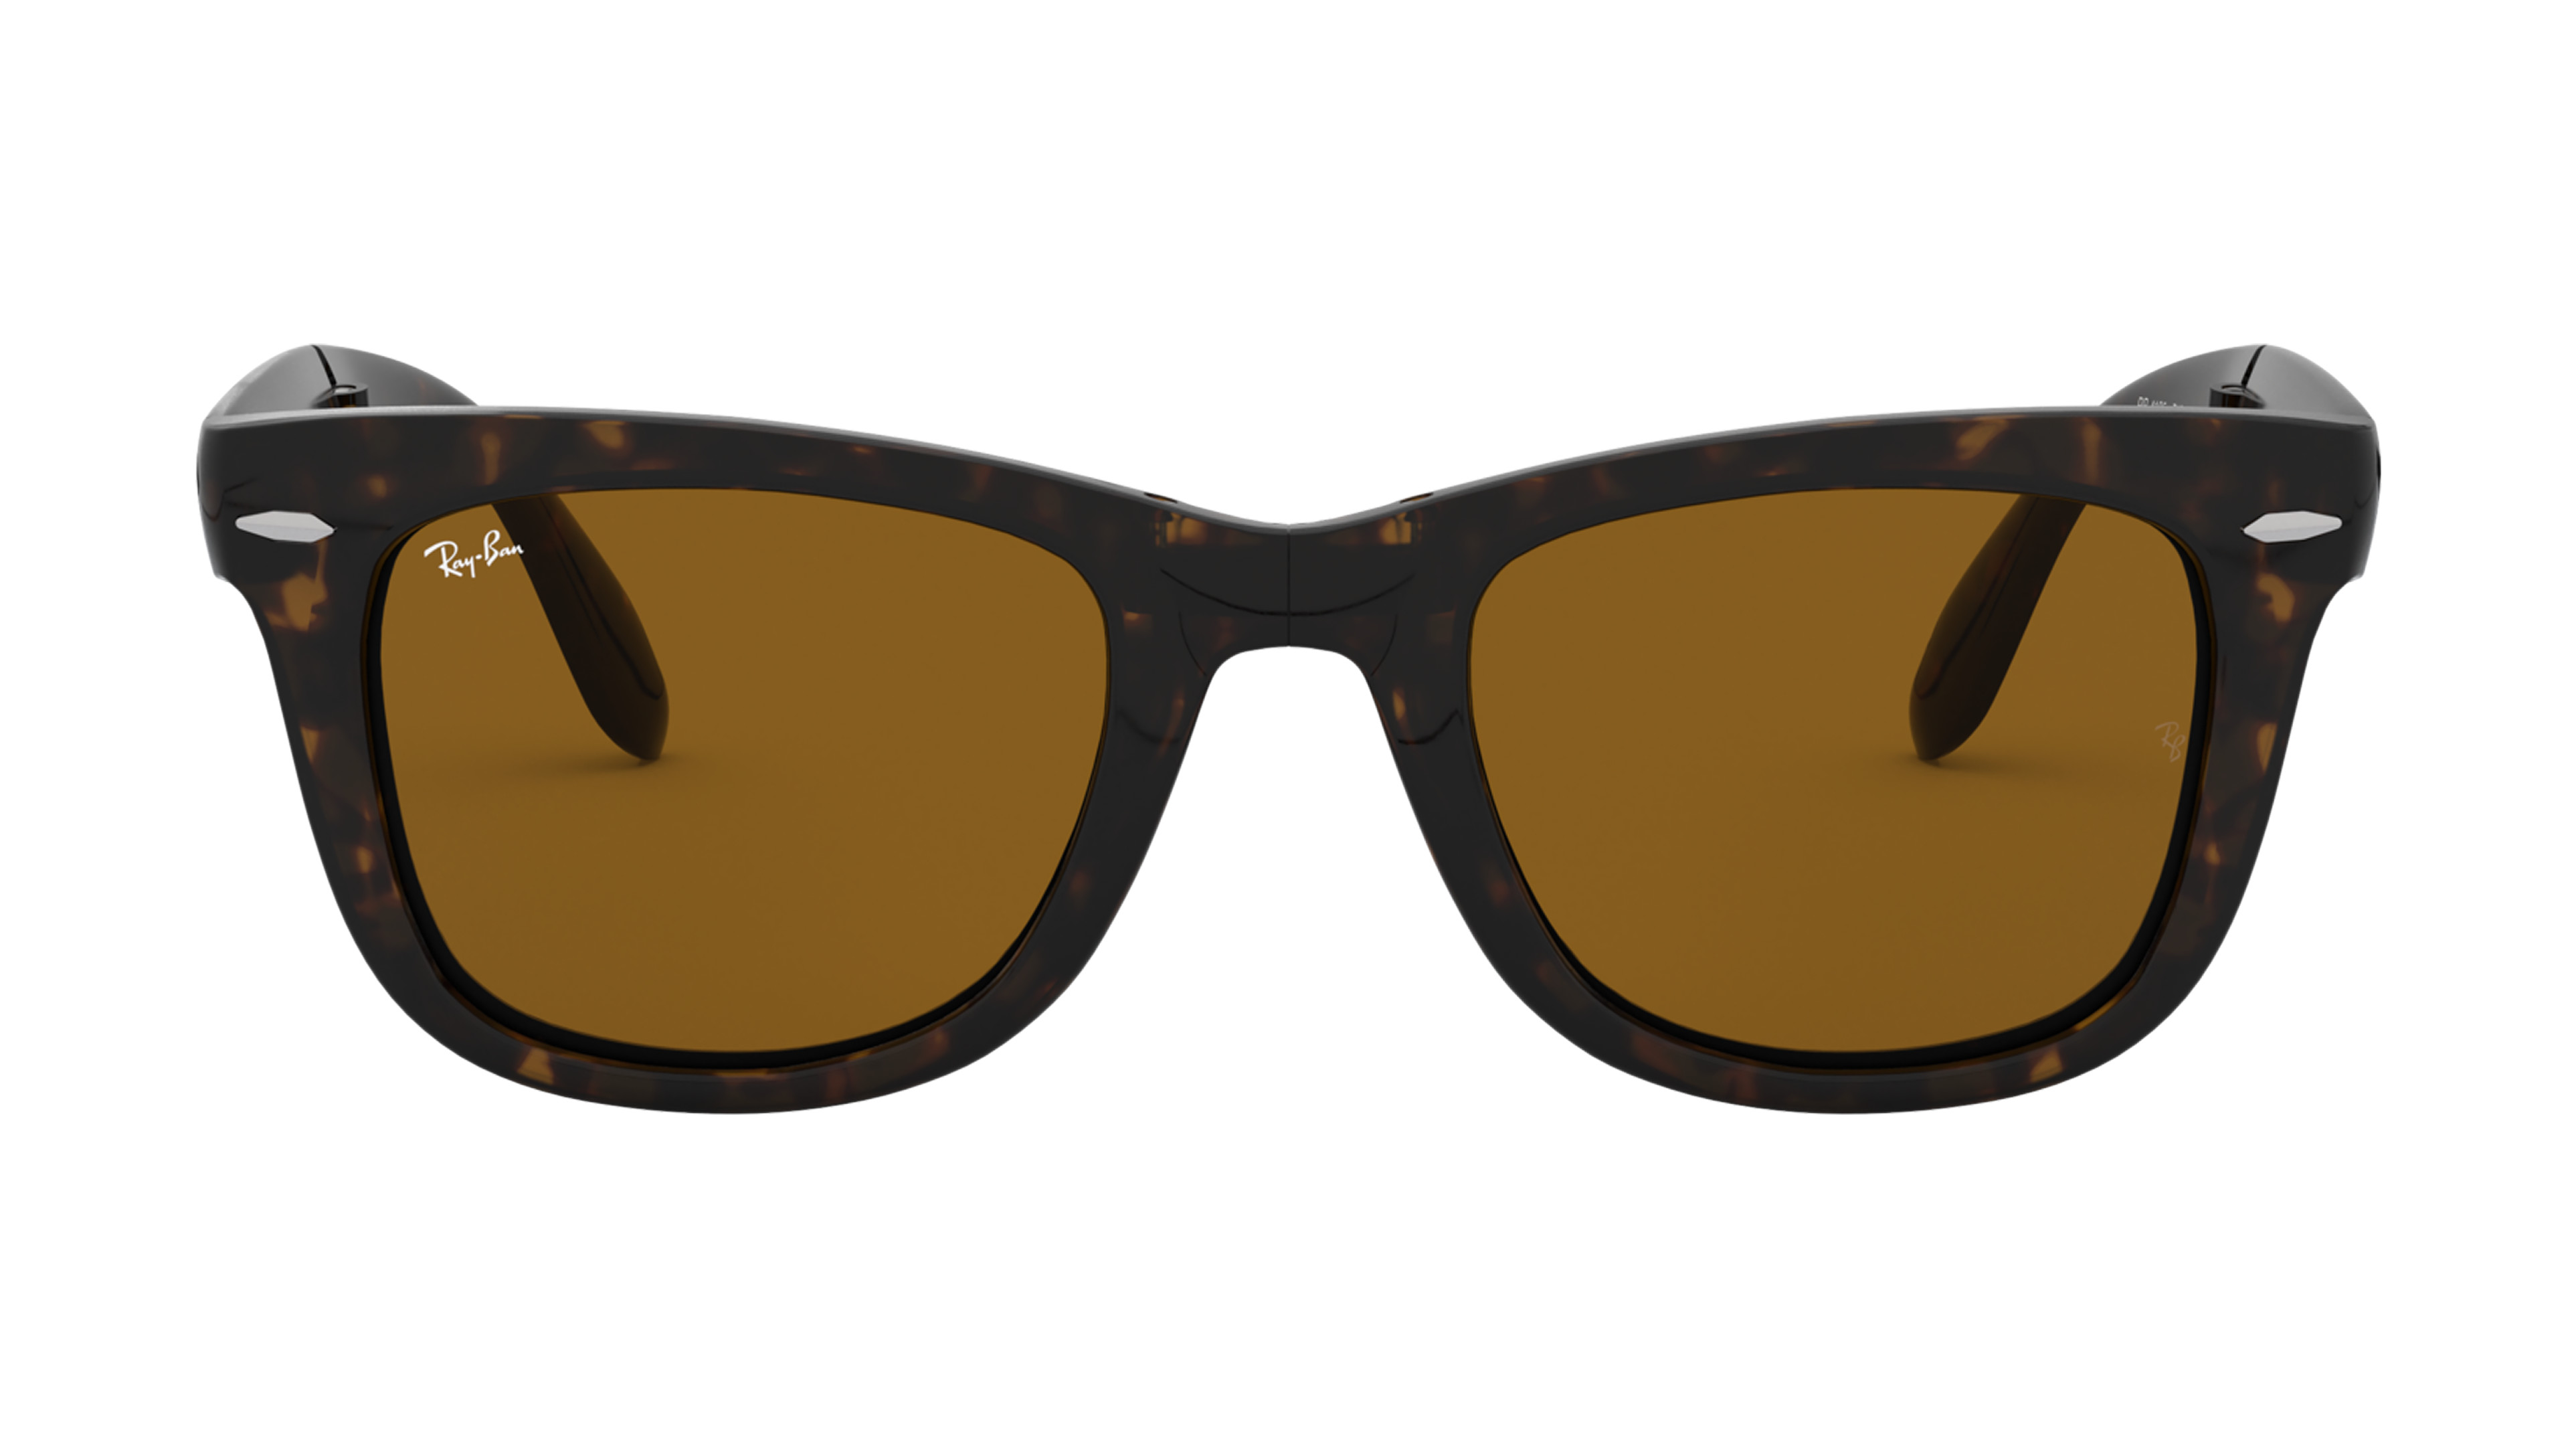 [products.image.front] Ray-Ban FOLDING WAYFARER 0RB4105 710 Sonnenbrille